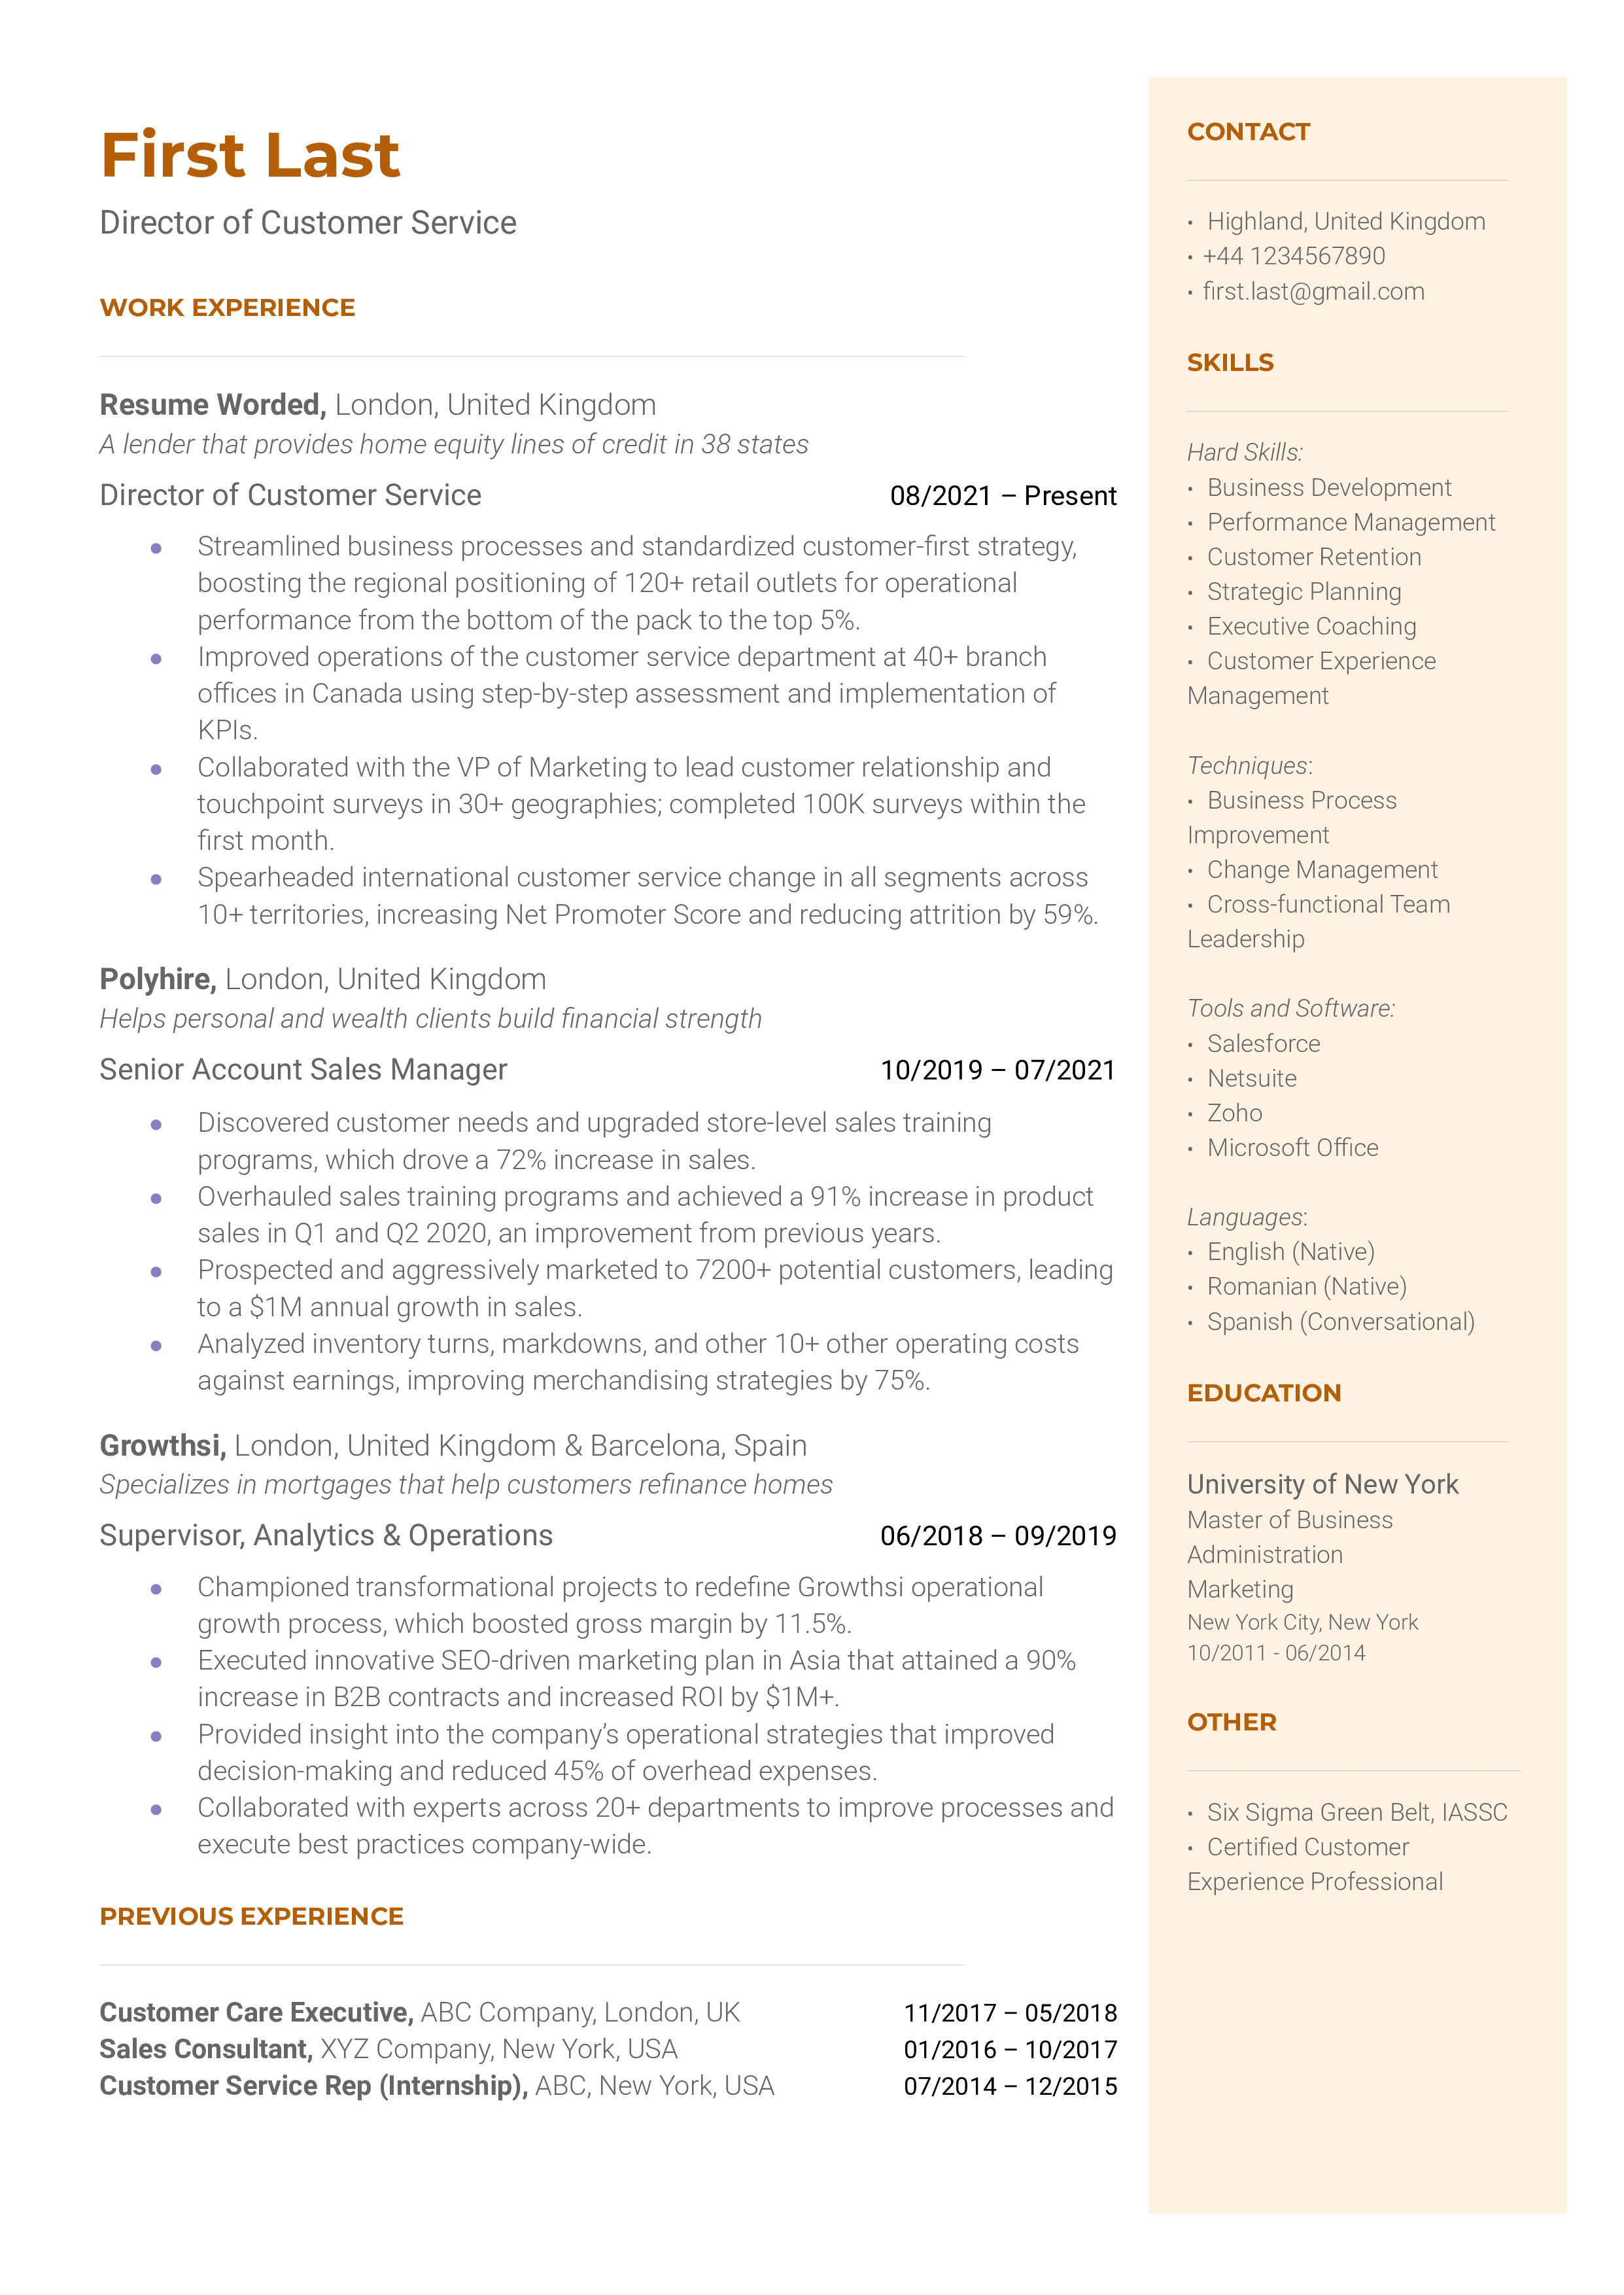 A well-structured CV for a Director of Customer Service role.